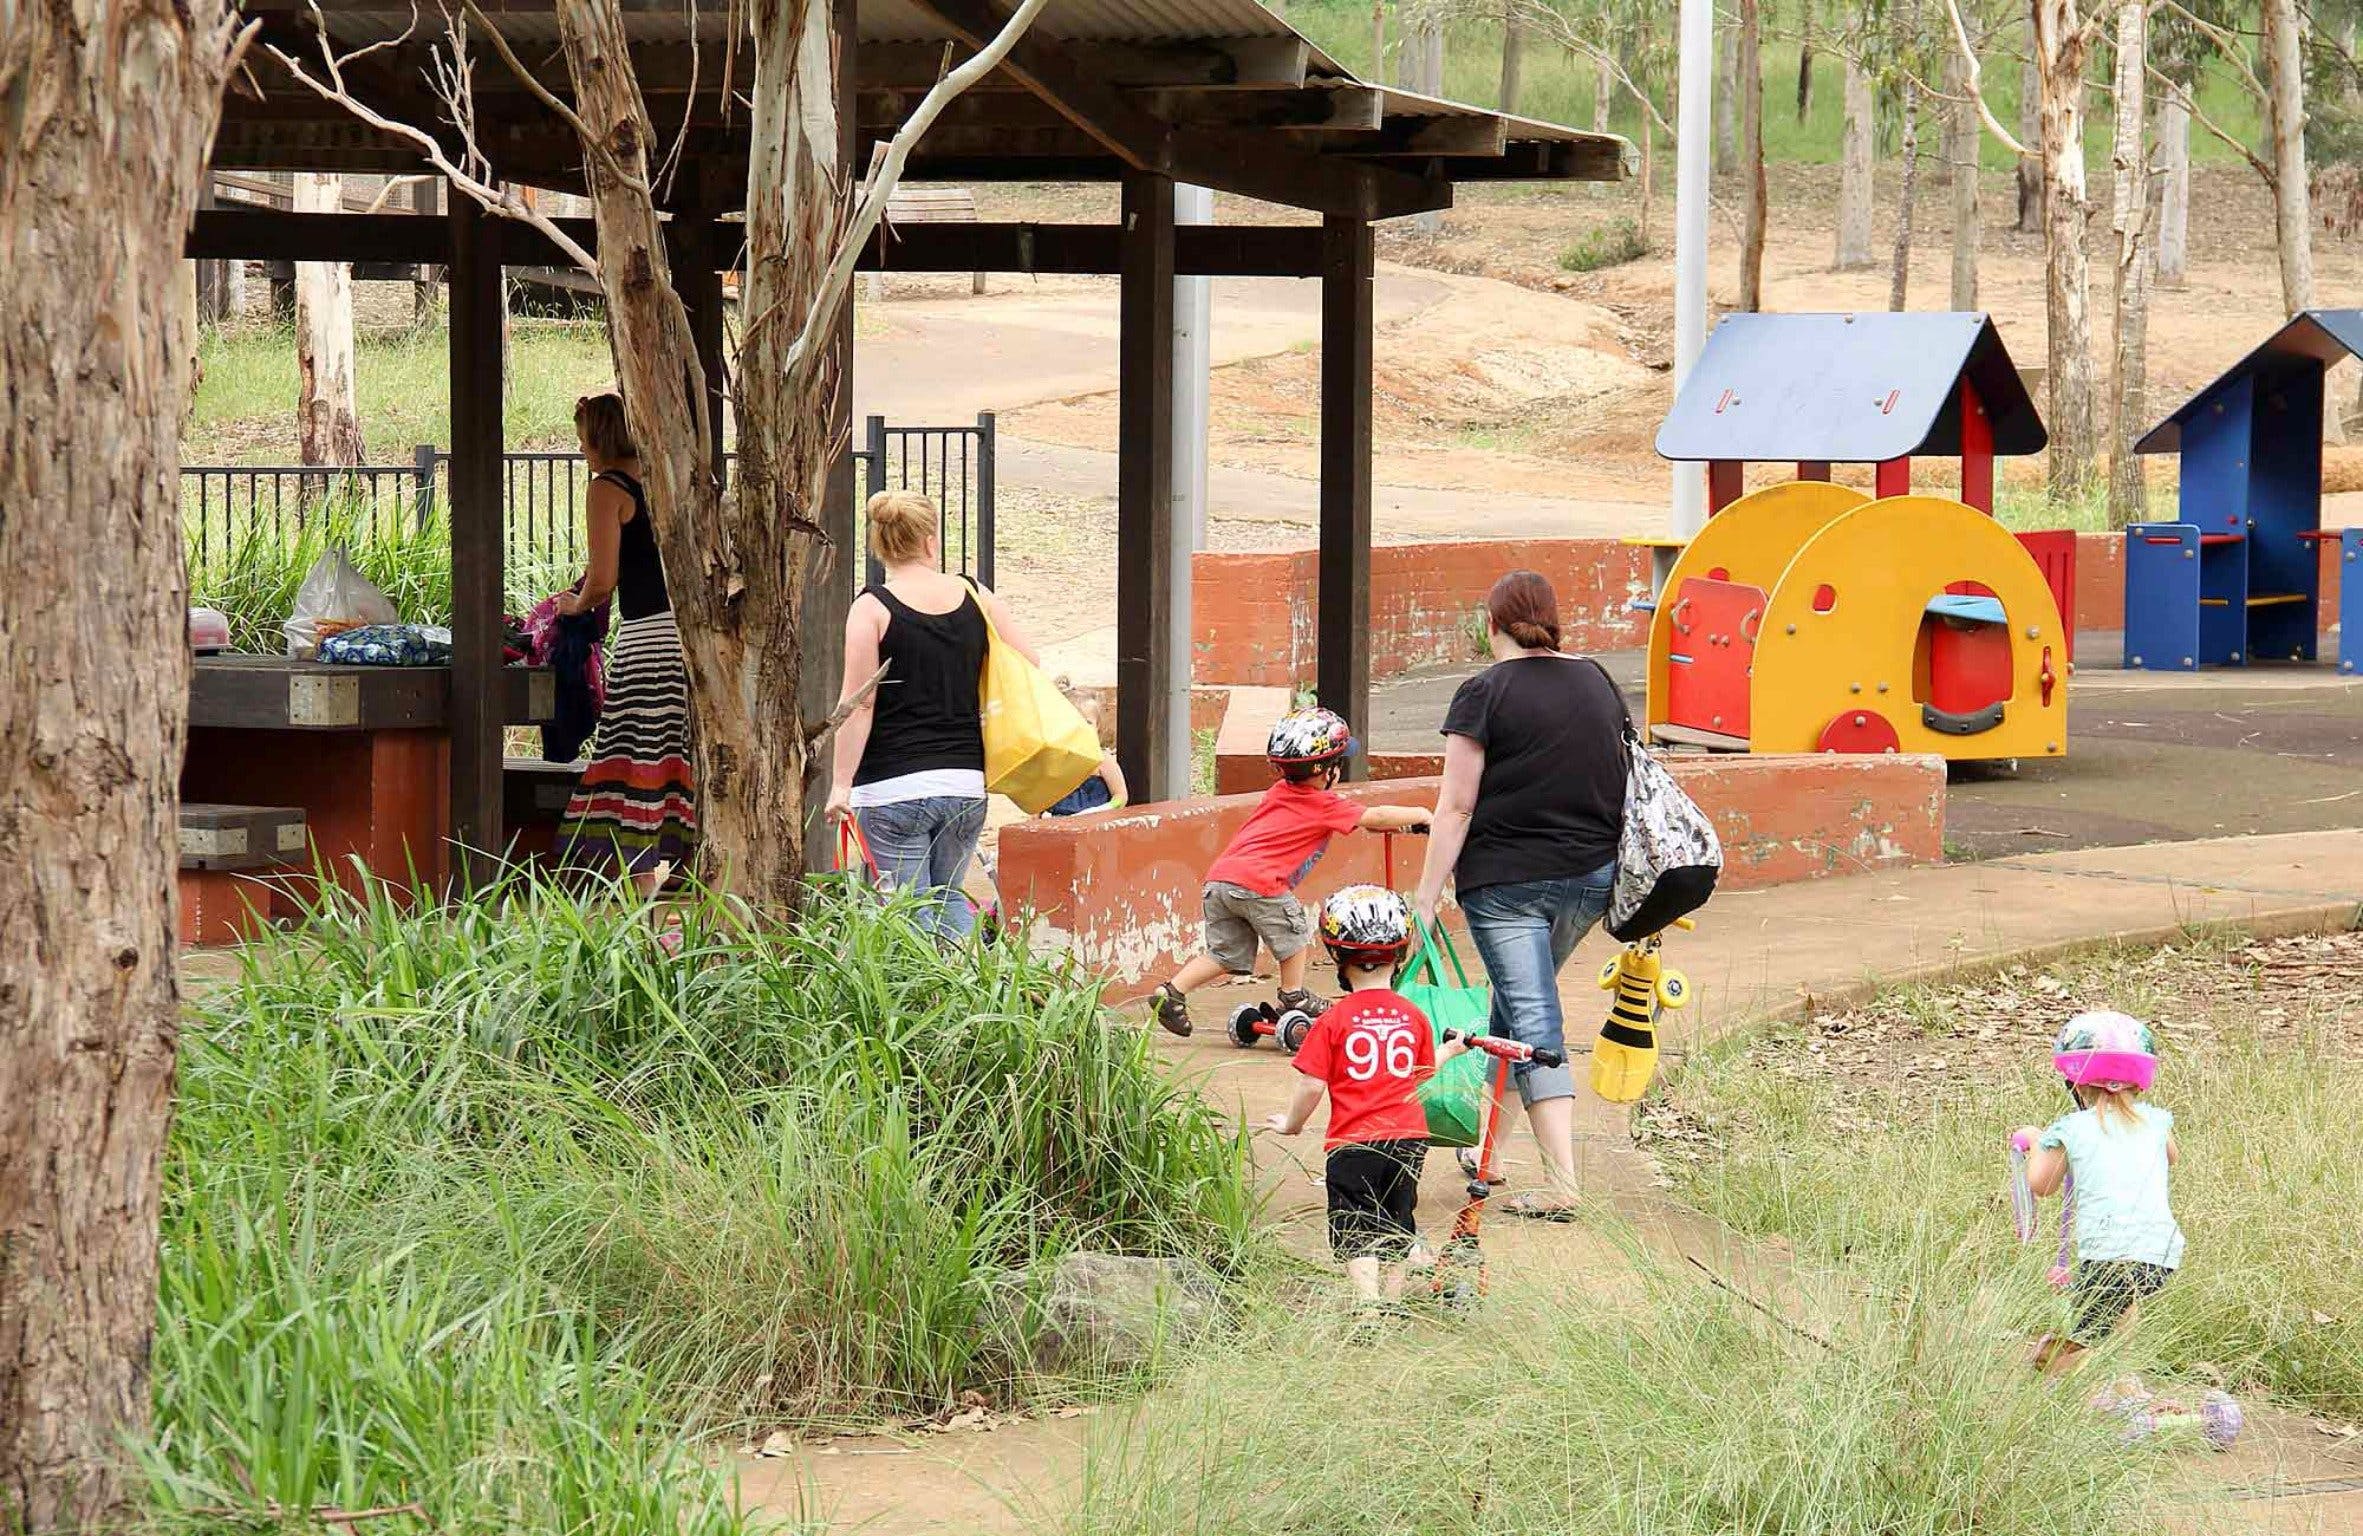 Rouse Hill picnic area and playground